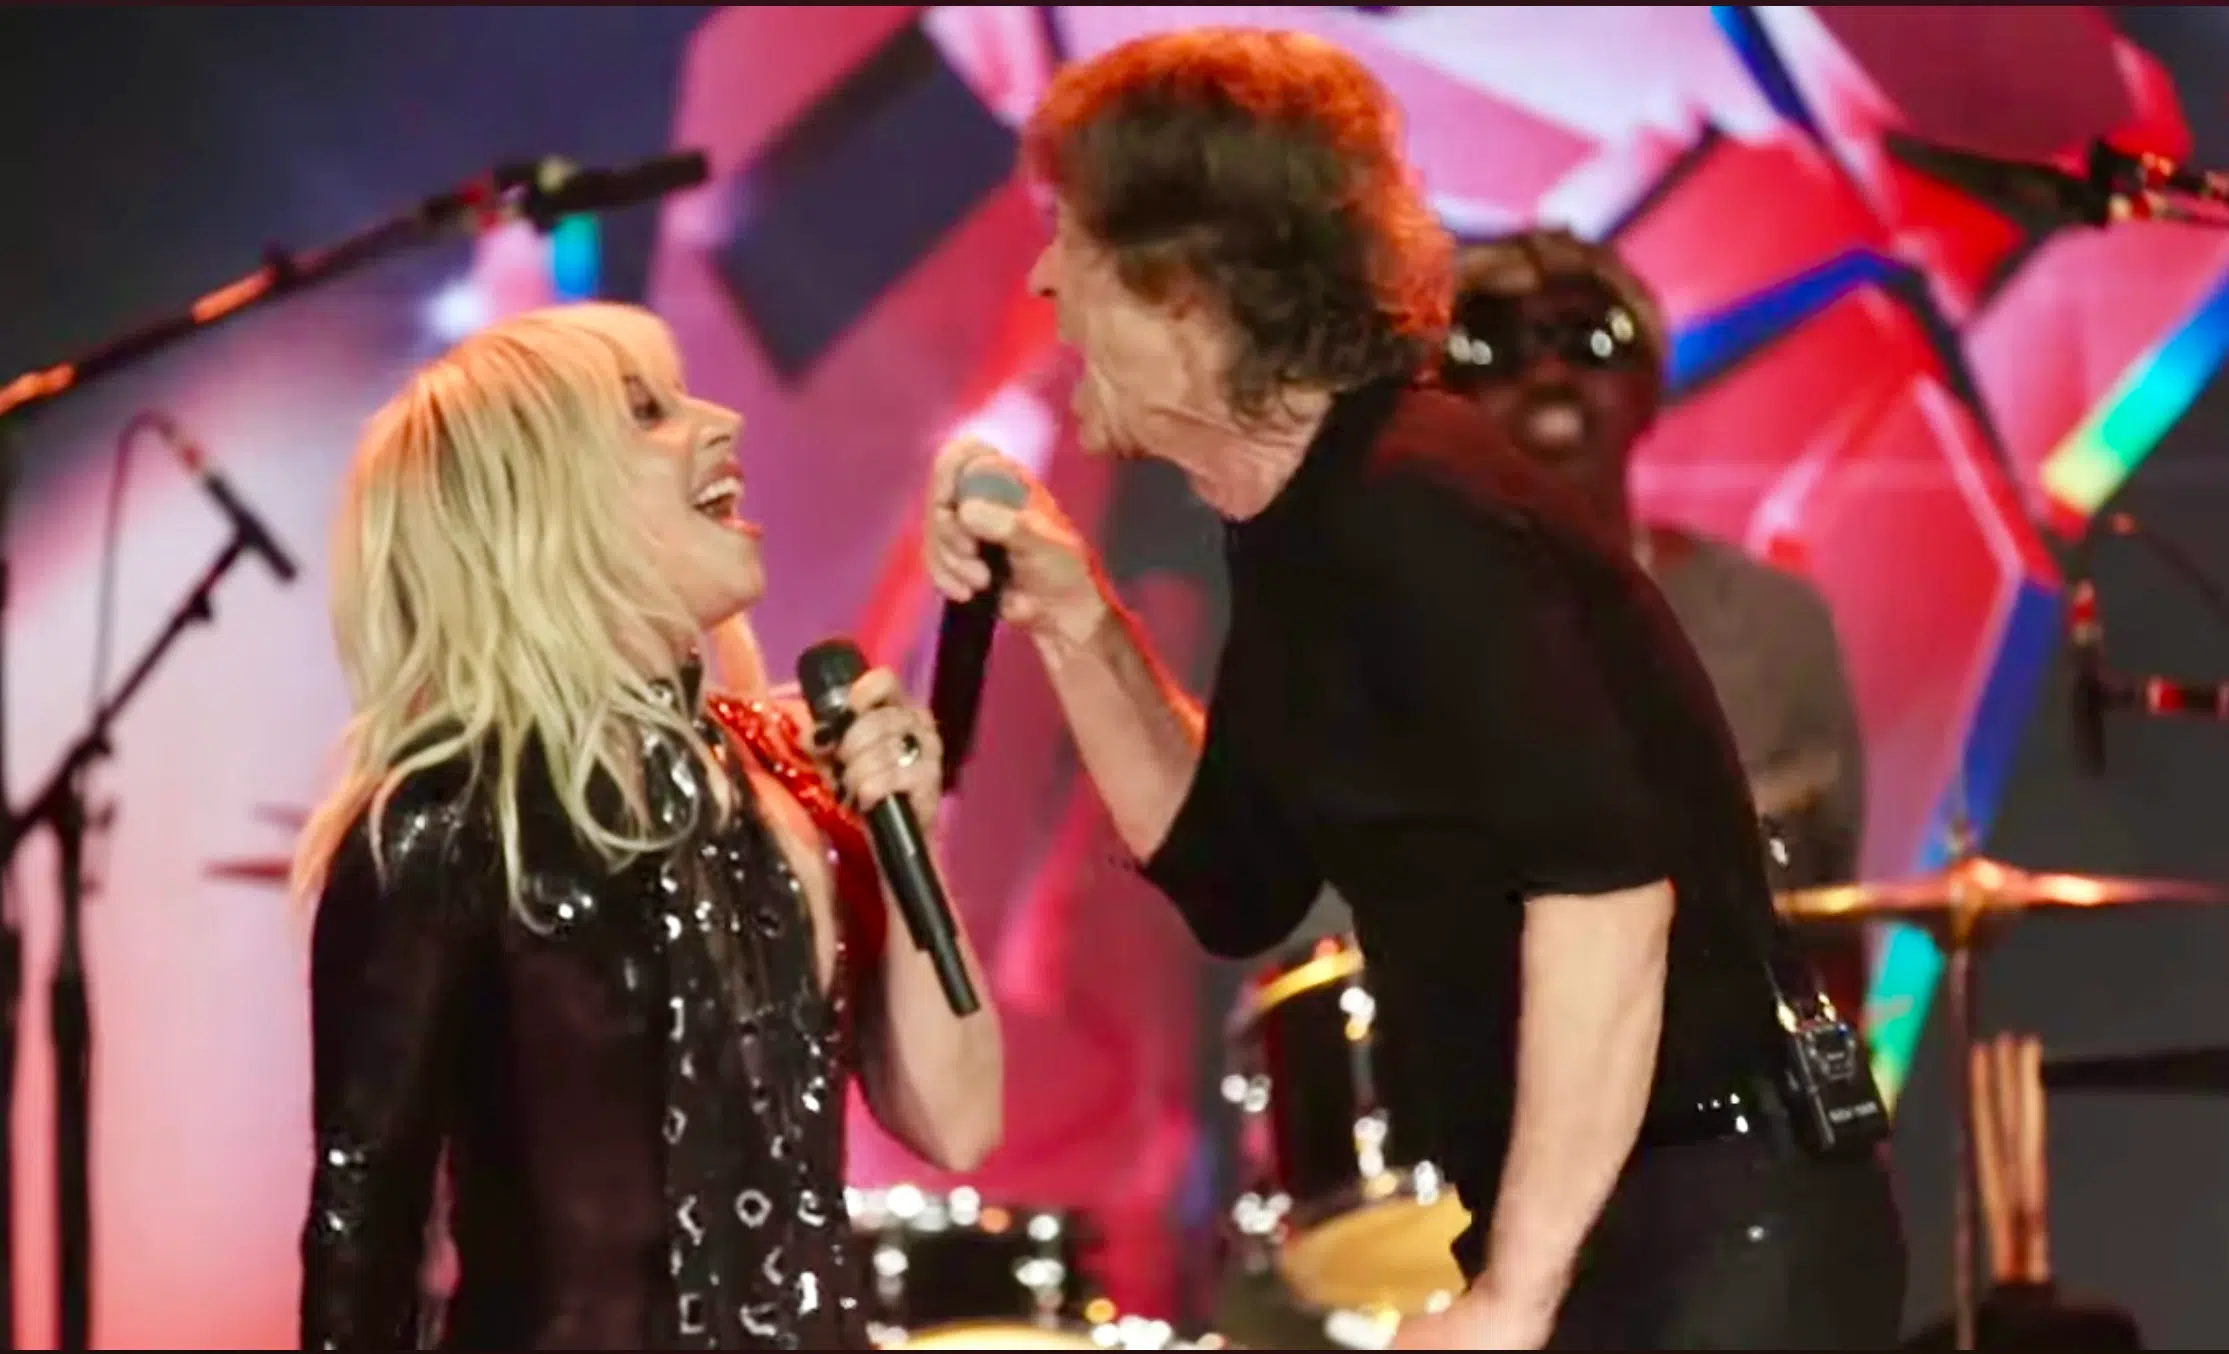 Rolling Stones, Lady Gaga are incredible at album release show in NY